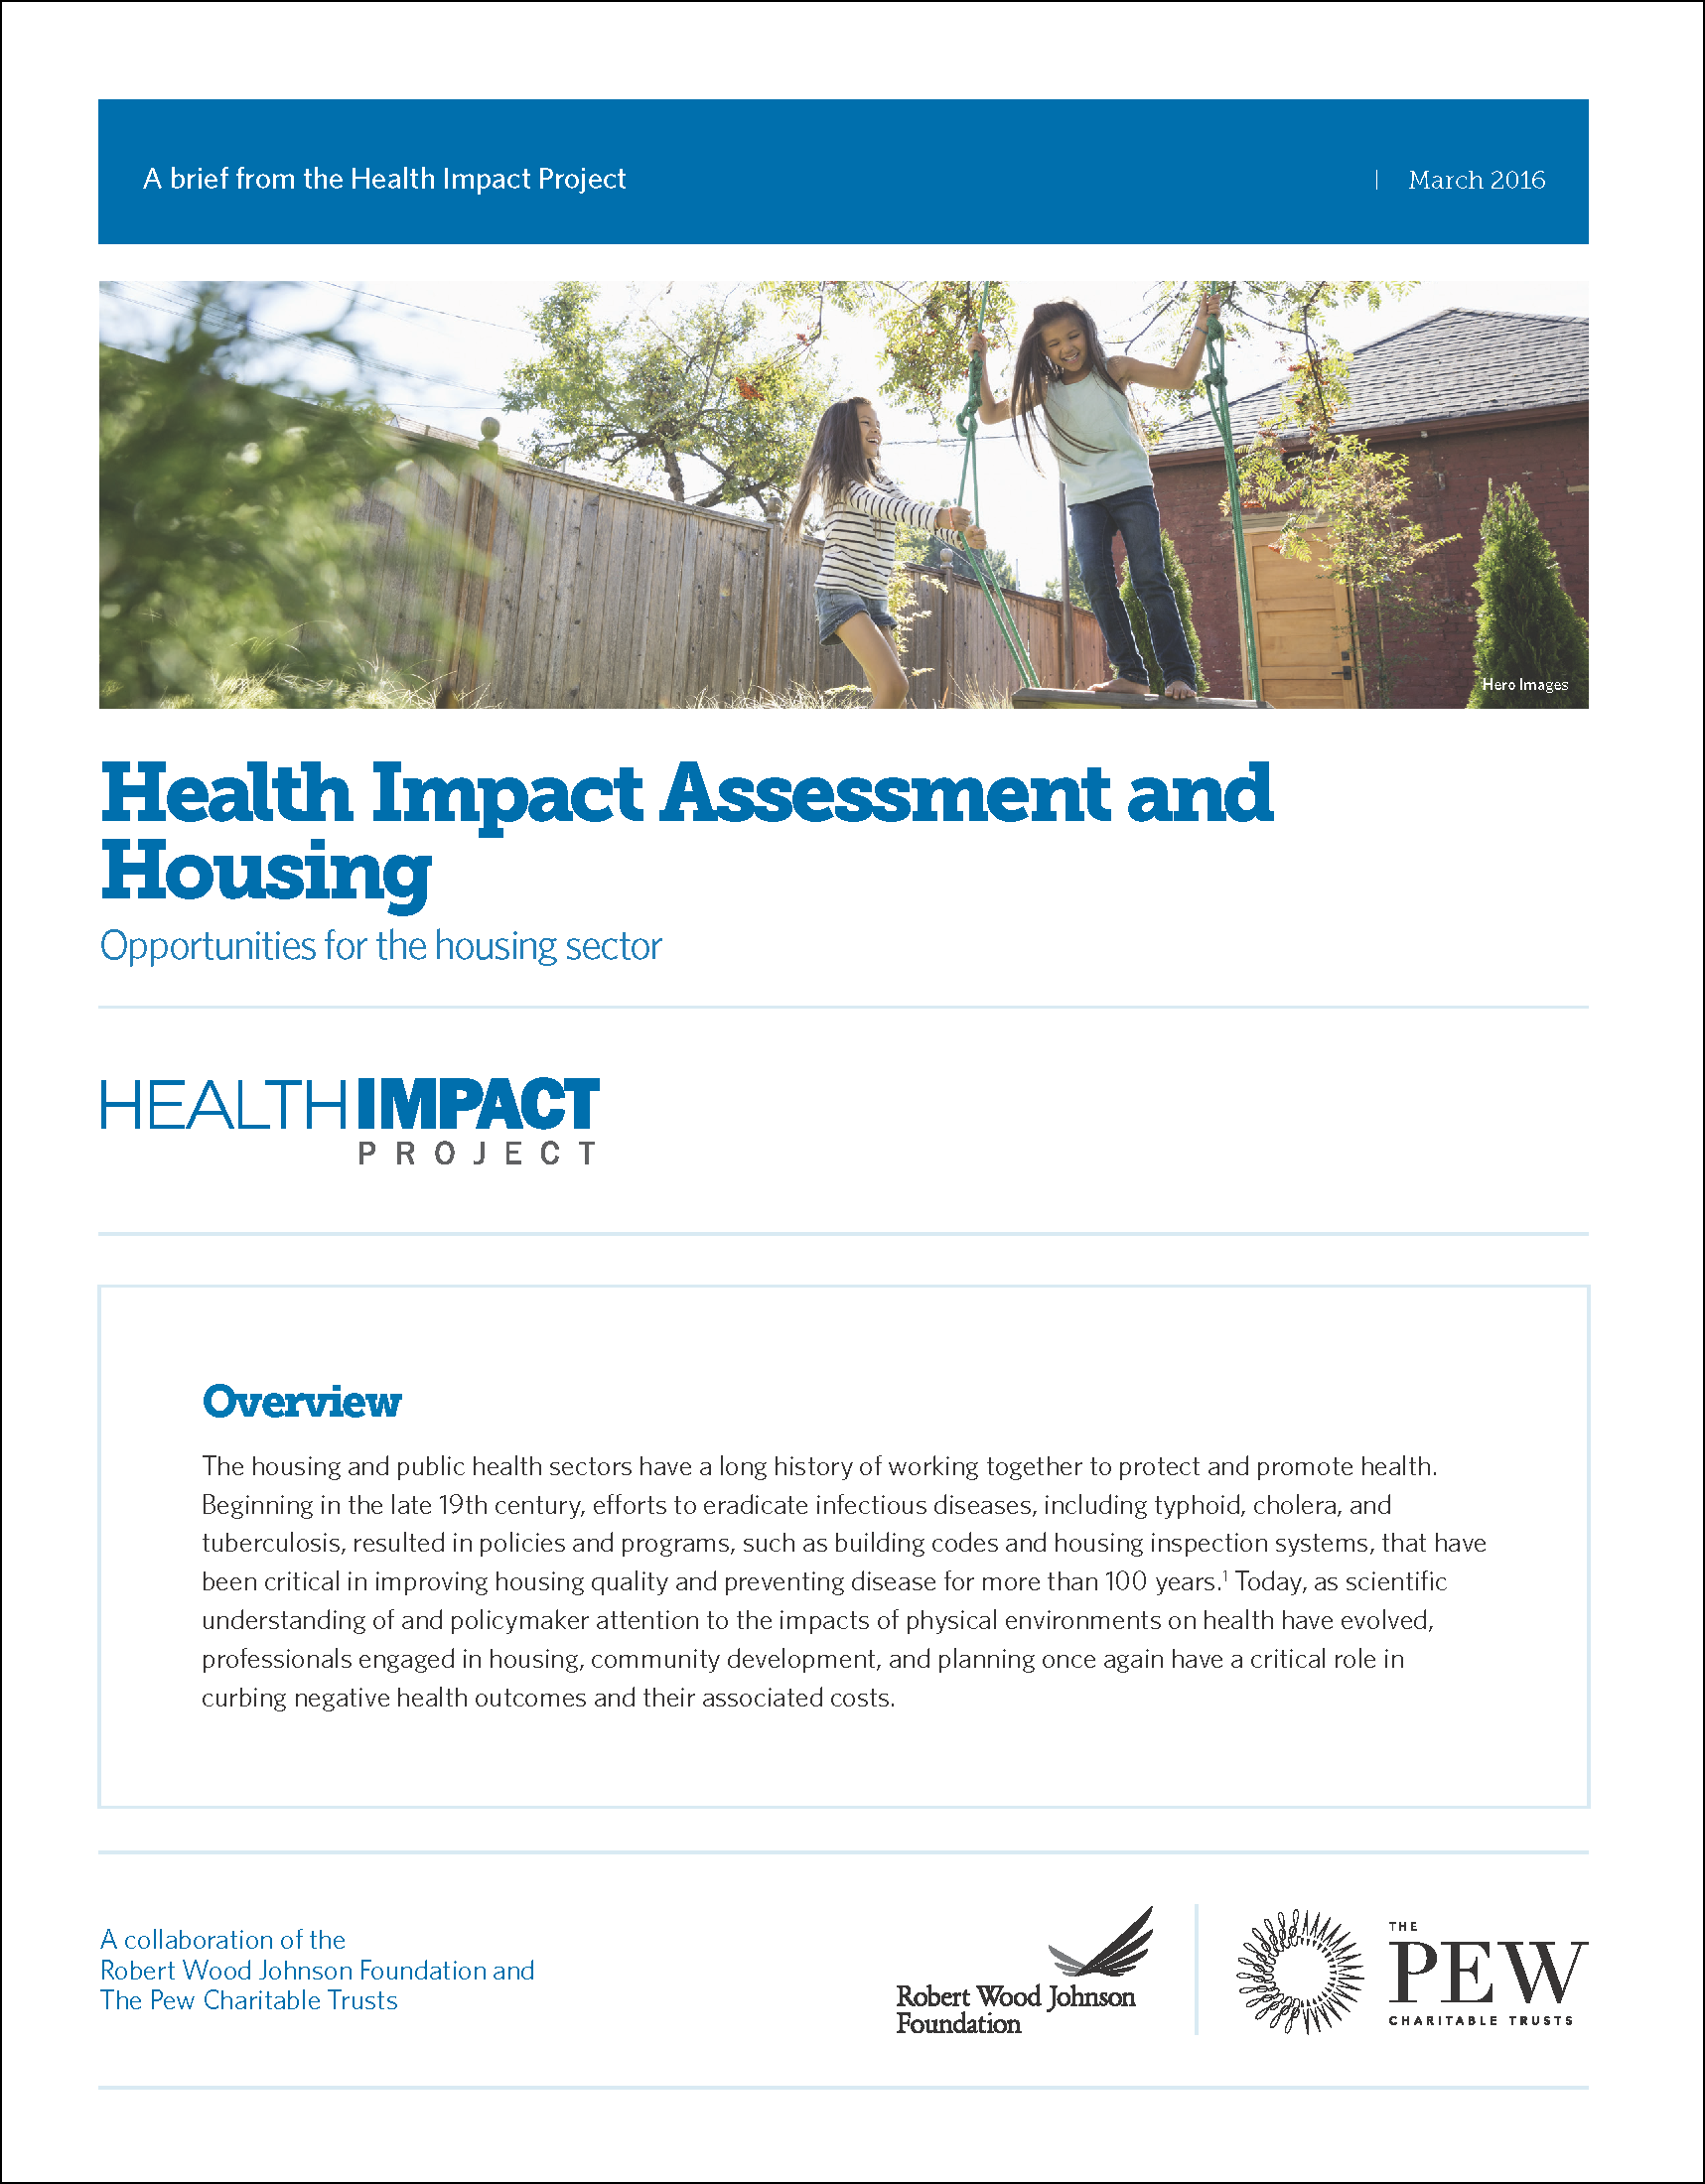 Health Impact Assessment and Housing: Opportunities for the Housing Sector